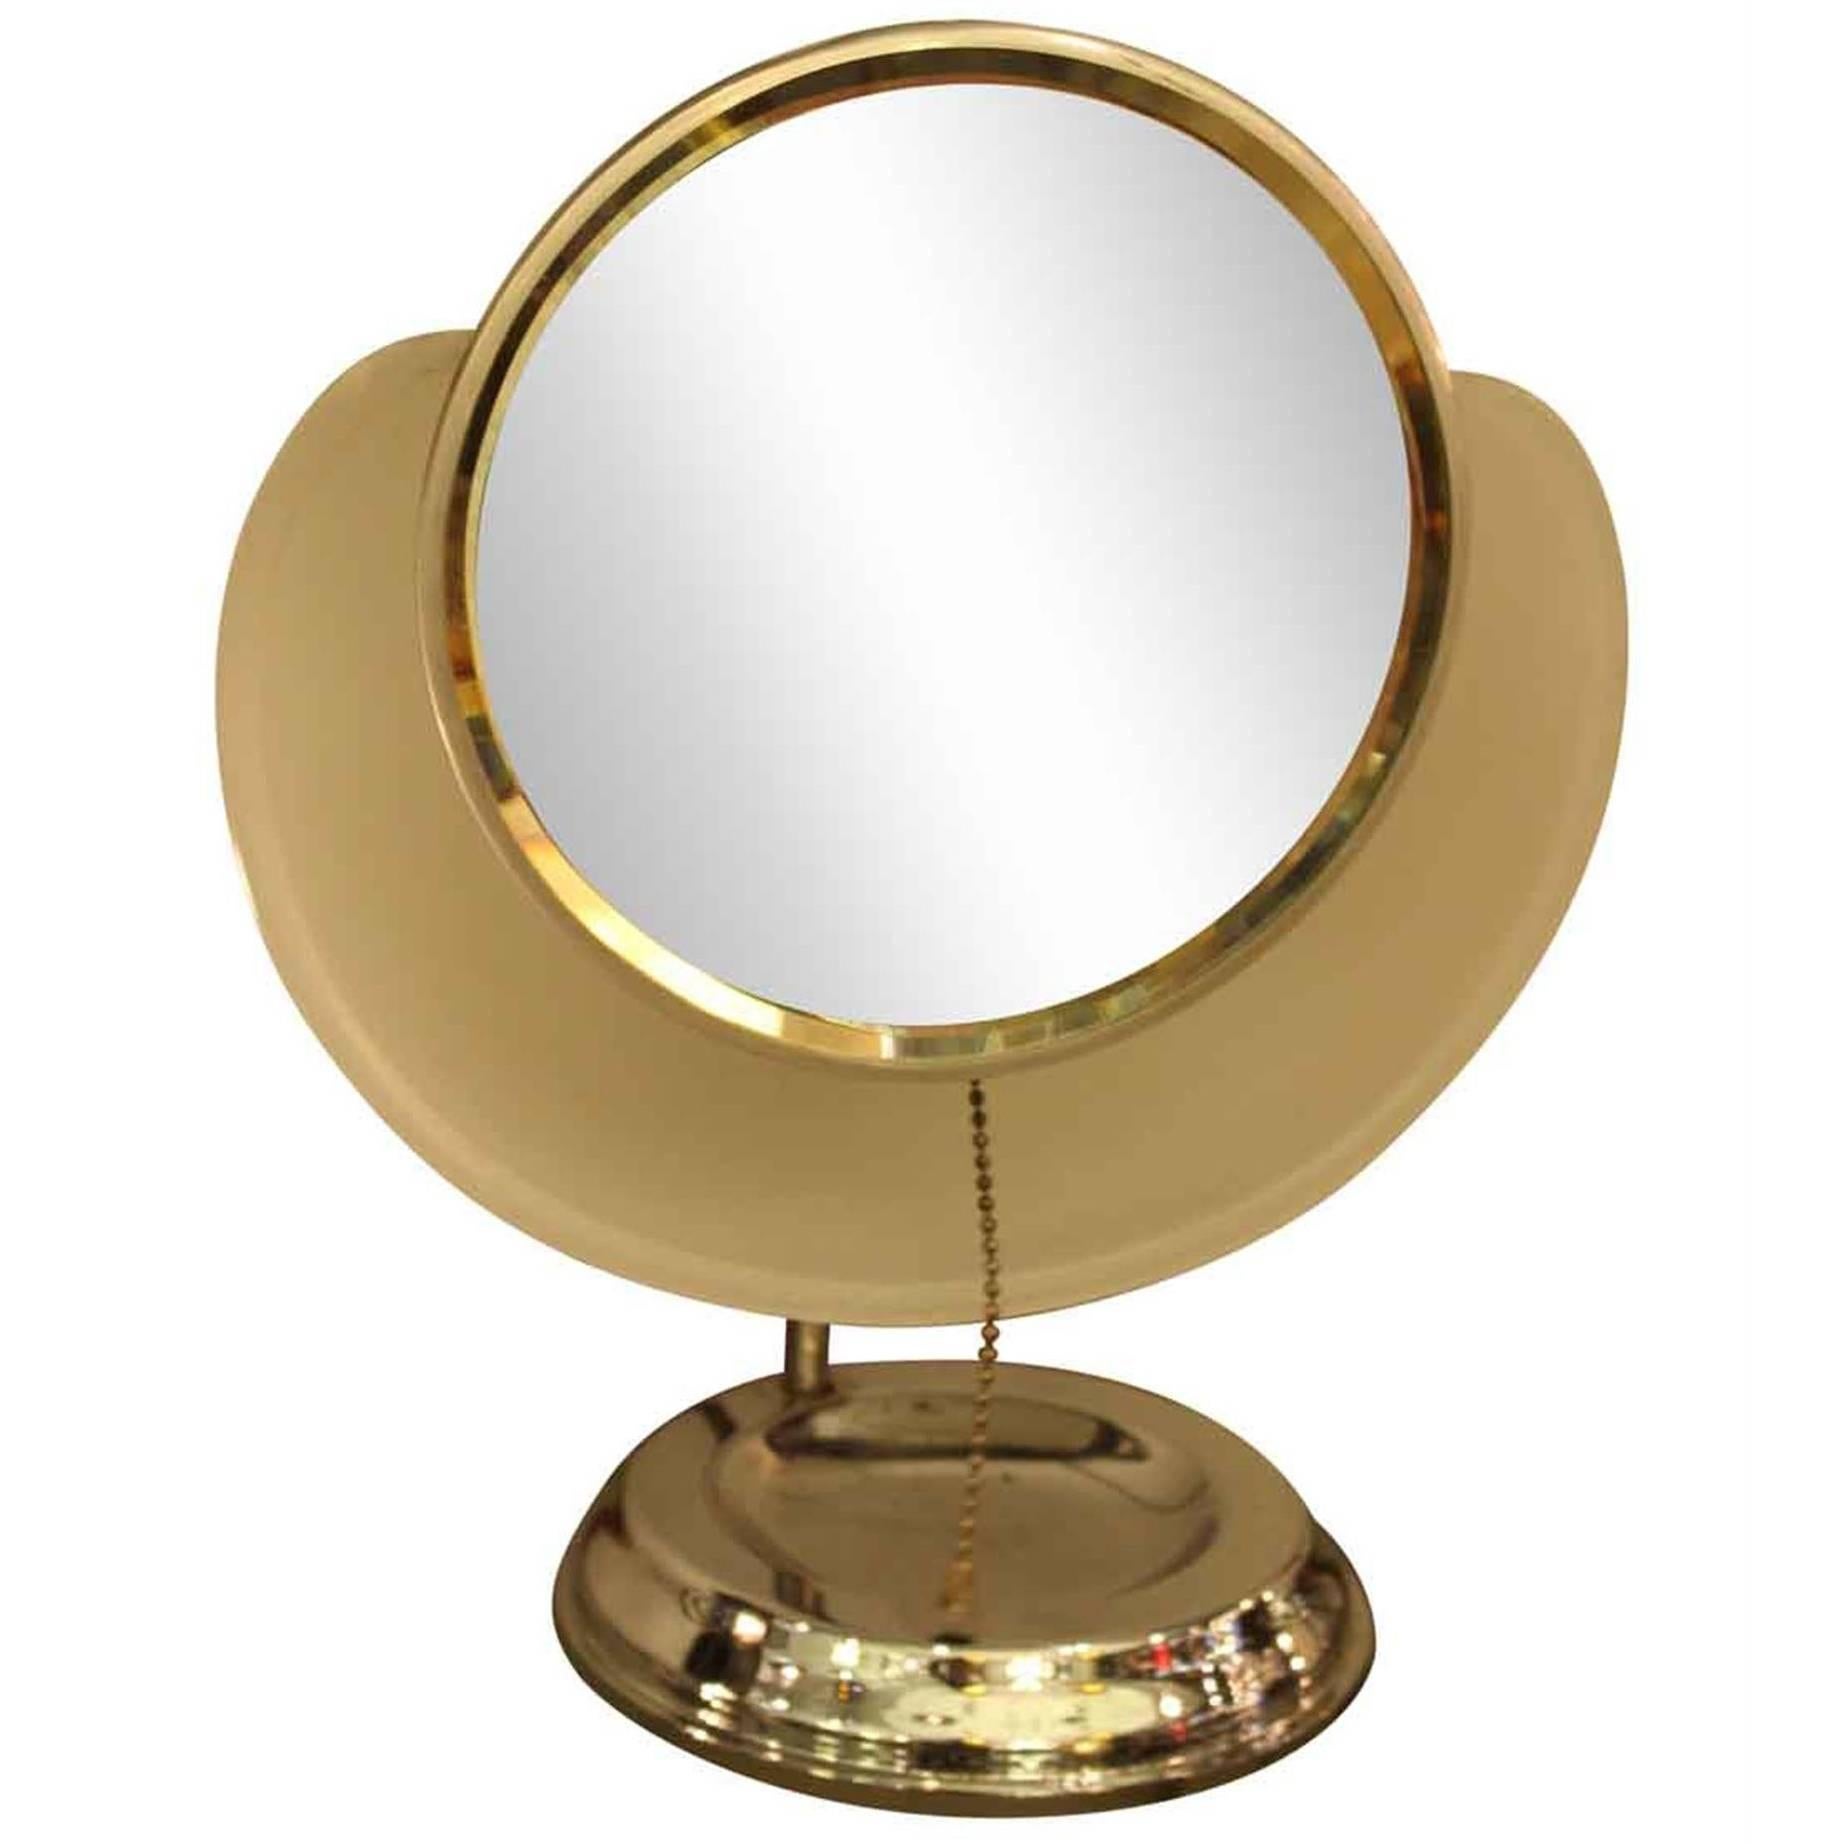 1930s Adjustable Bathroom Standing Shaving Mirror with Light and Frosted Shade